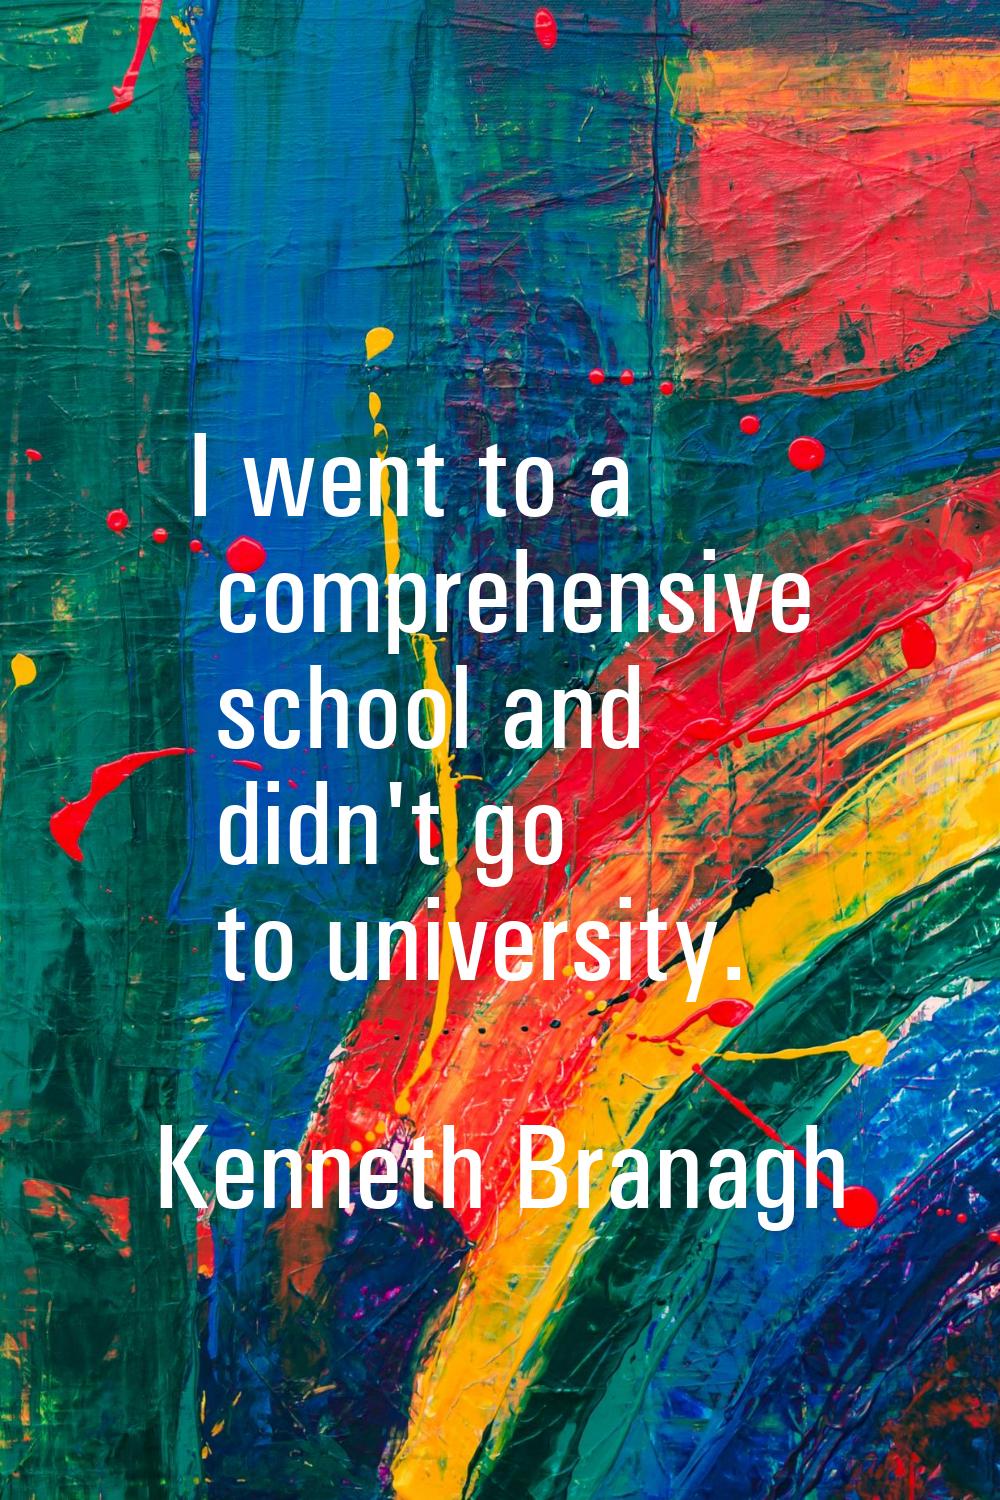 I went to a comprehensive school and didn't go to university.